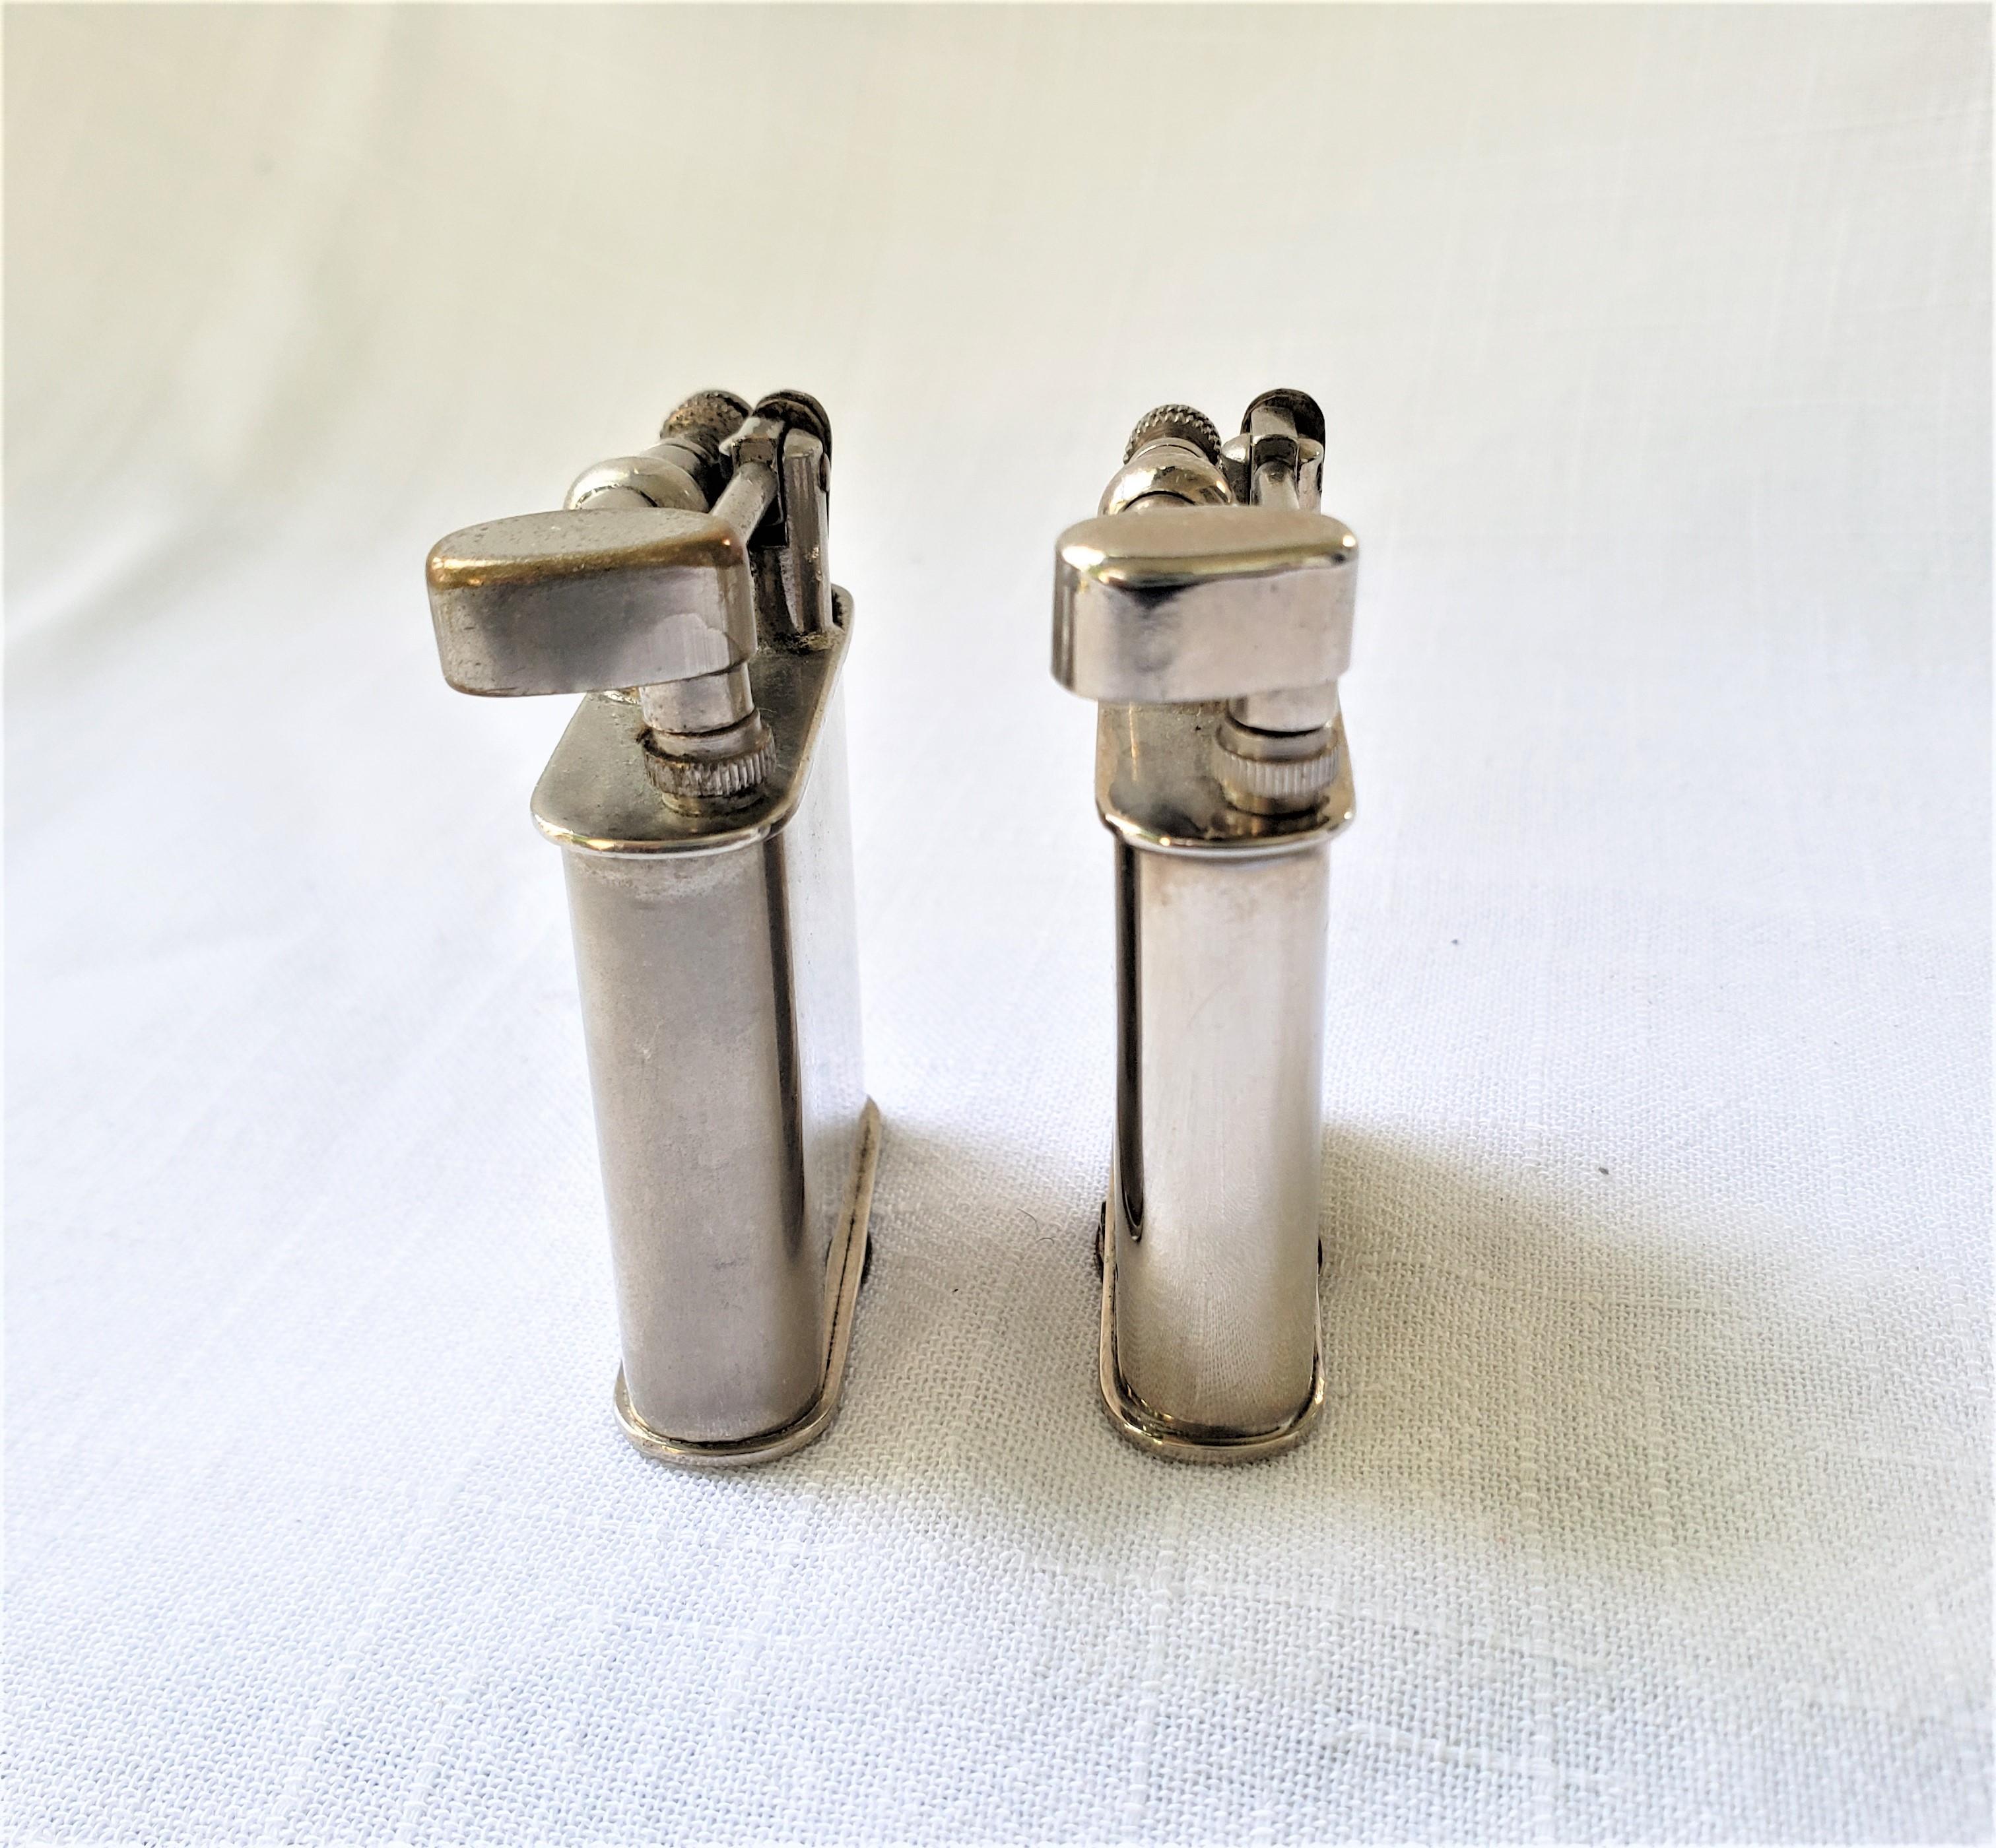 Pair of Antique Canadian Club Whiskey Advertising Swing Arm Pocket Lighters In Good Condition For Sale In Hamilton, Ontario